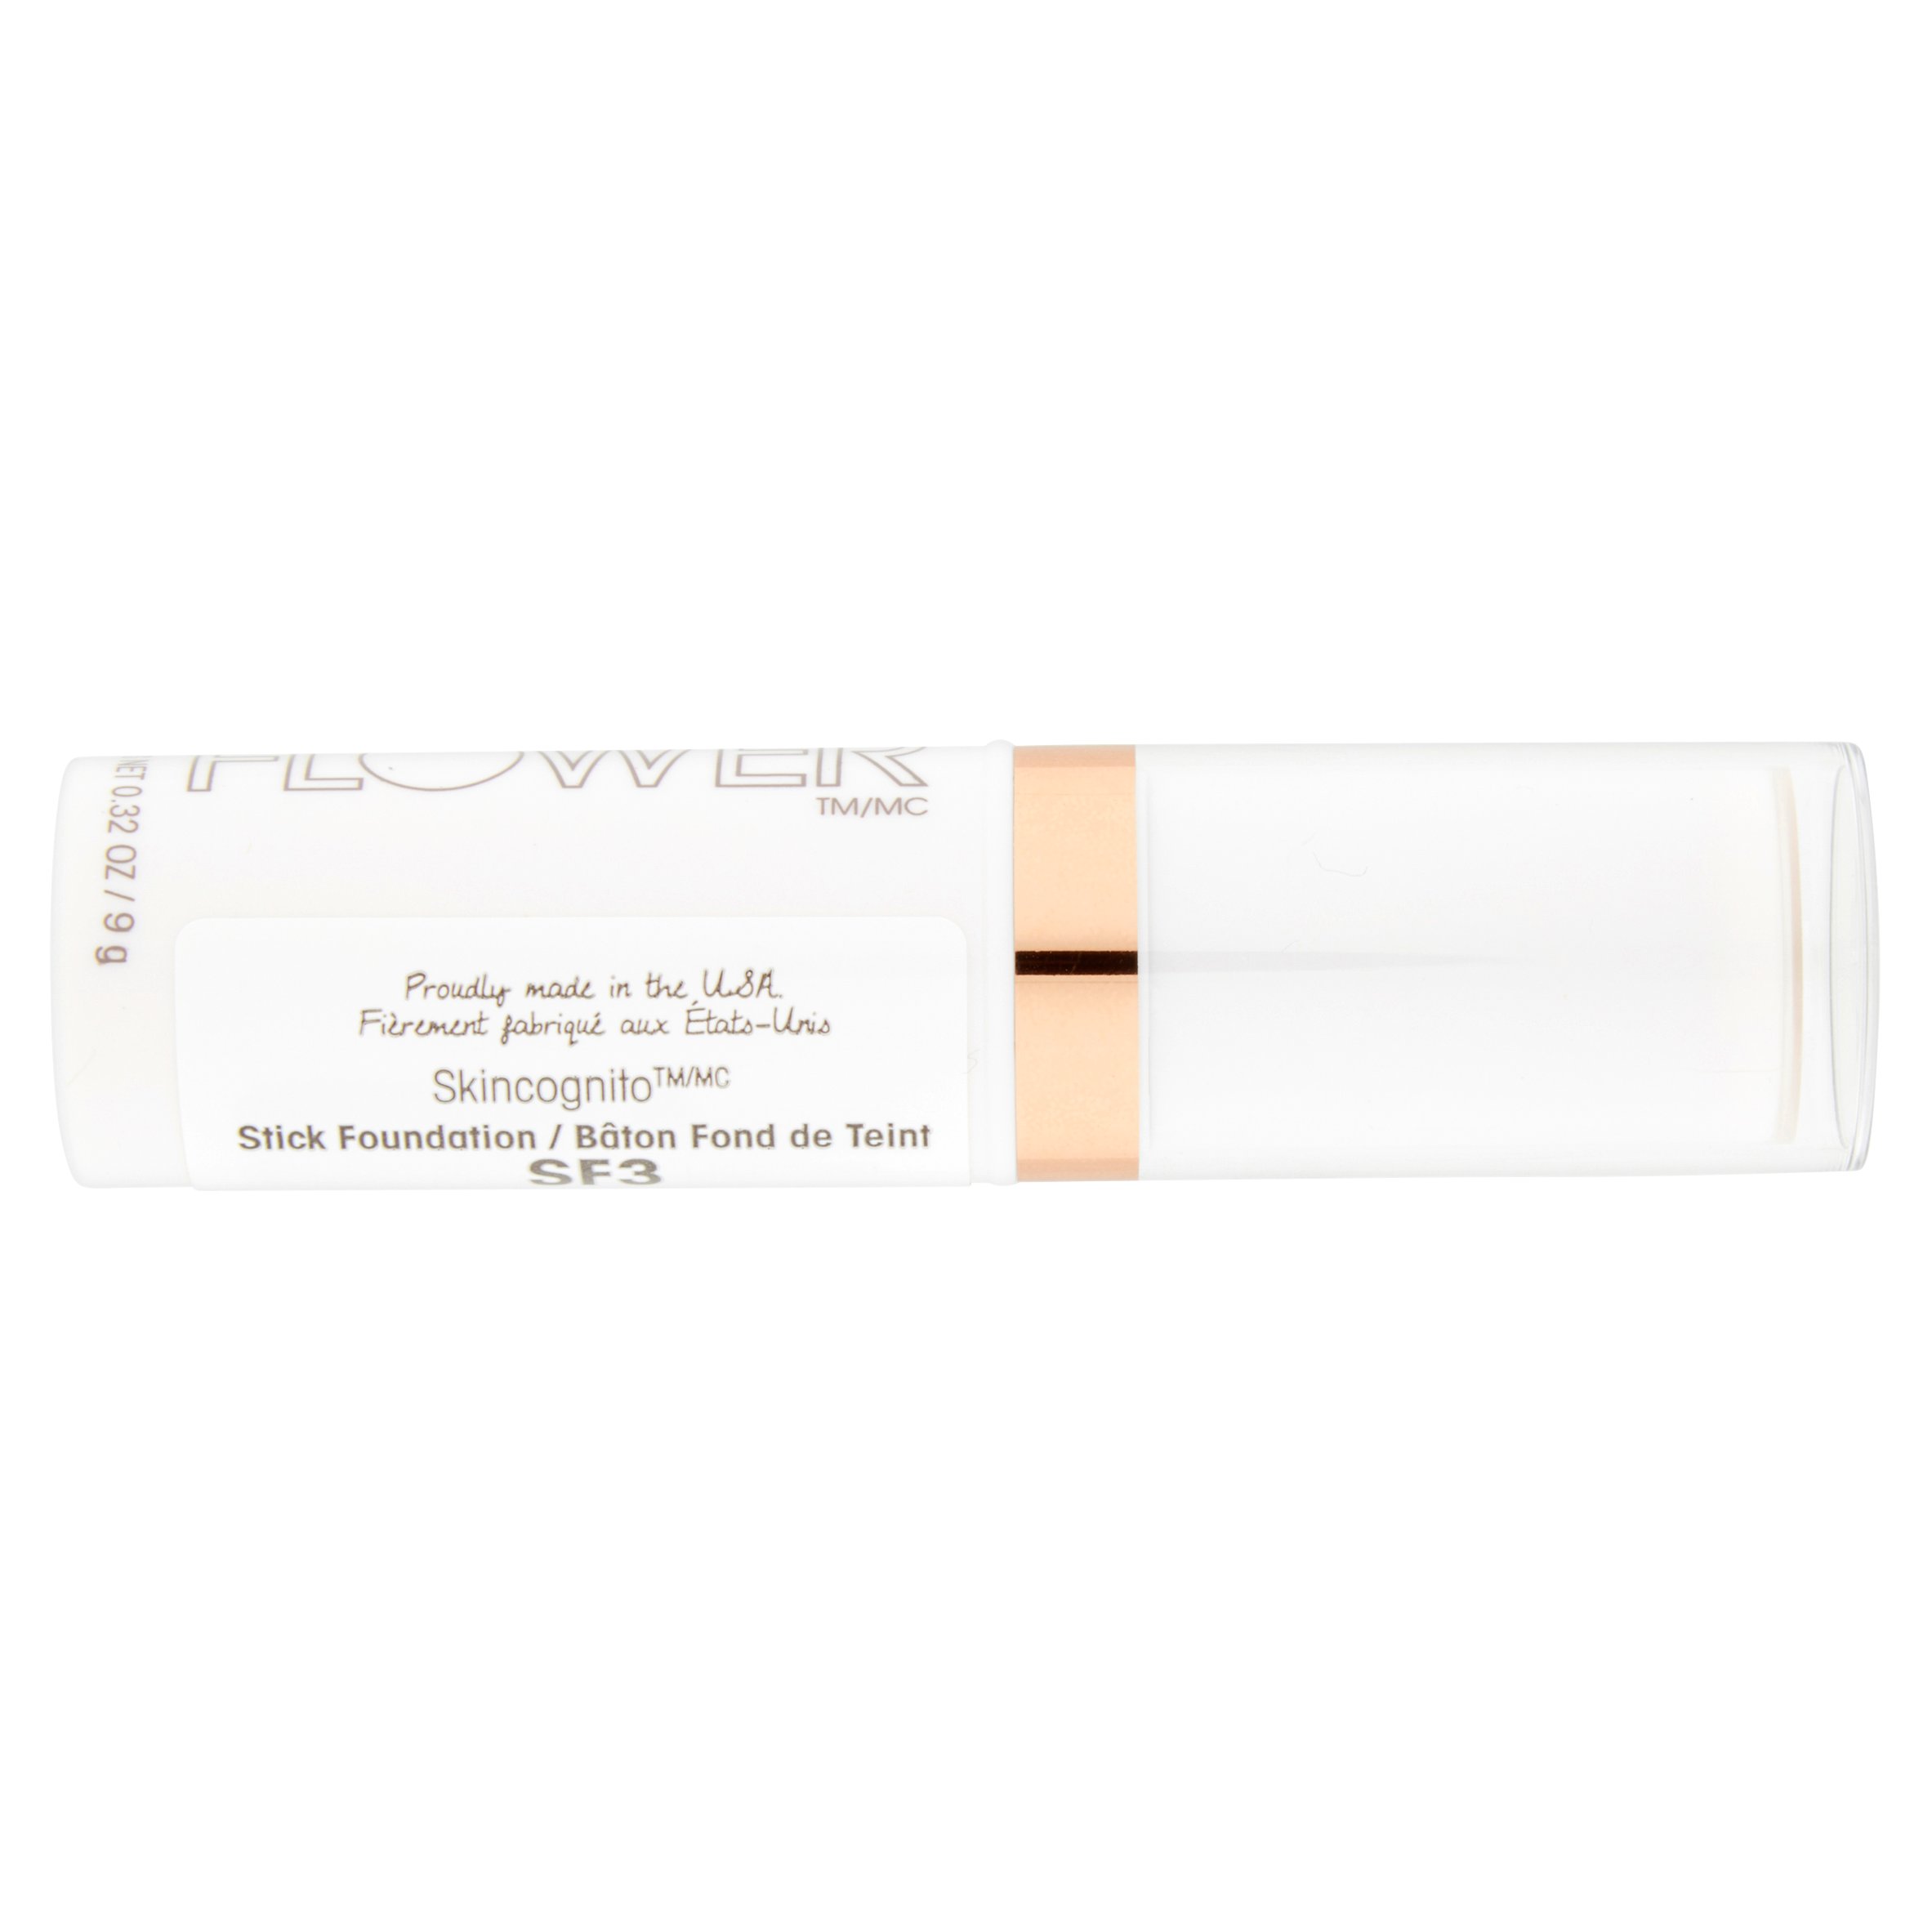 FLOWER Skincognito Stick Foundation, Shade 3 - image 5 of 5